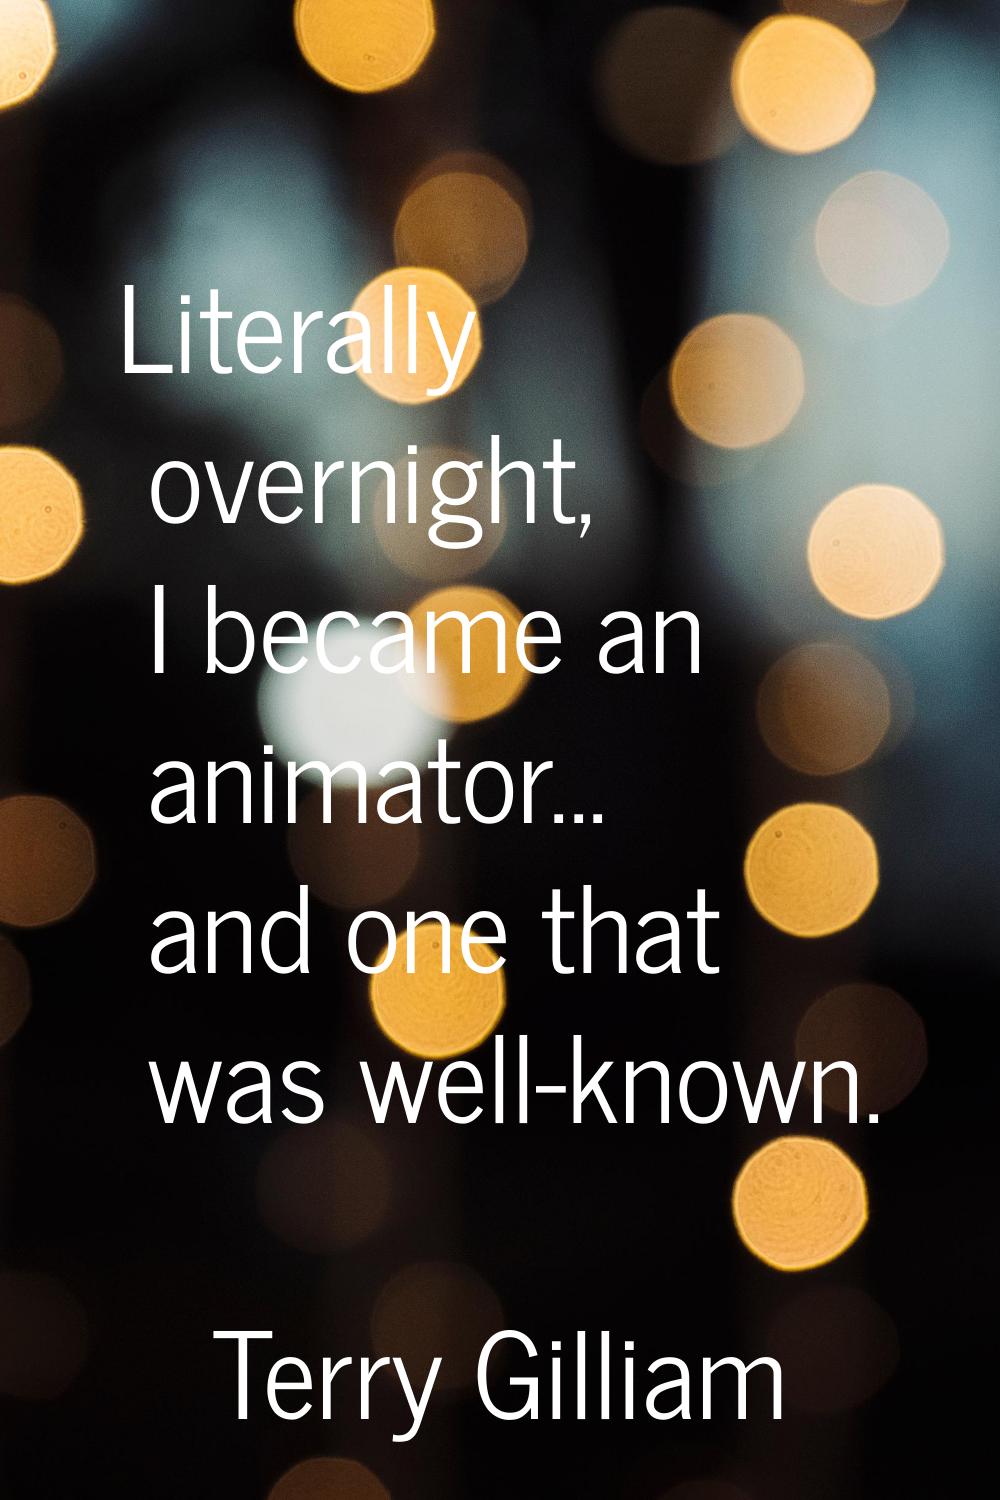 Literally overnight, I became an animator... and one that was well-known.